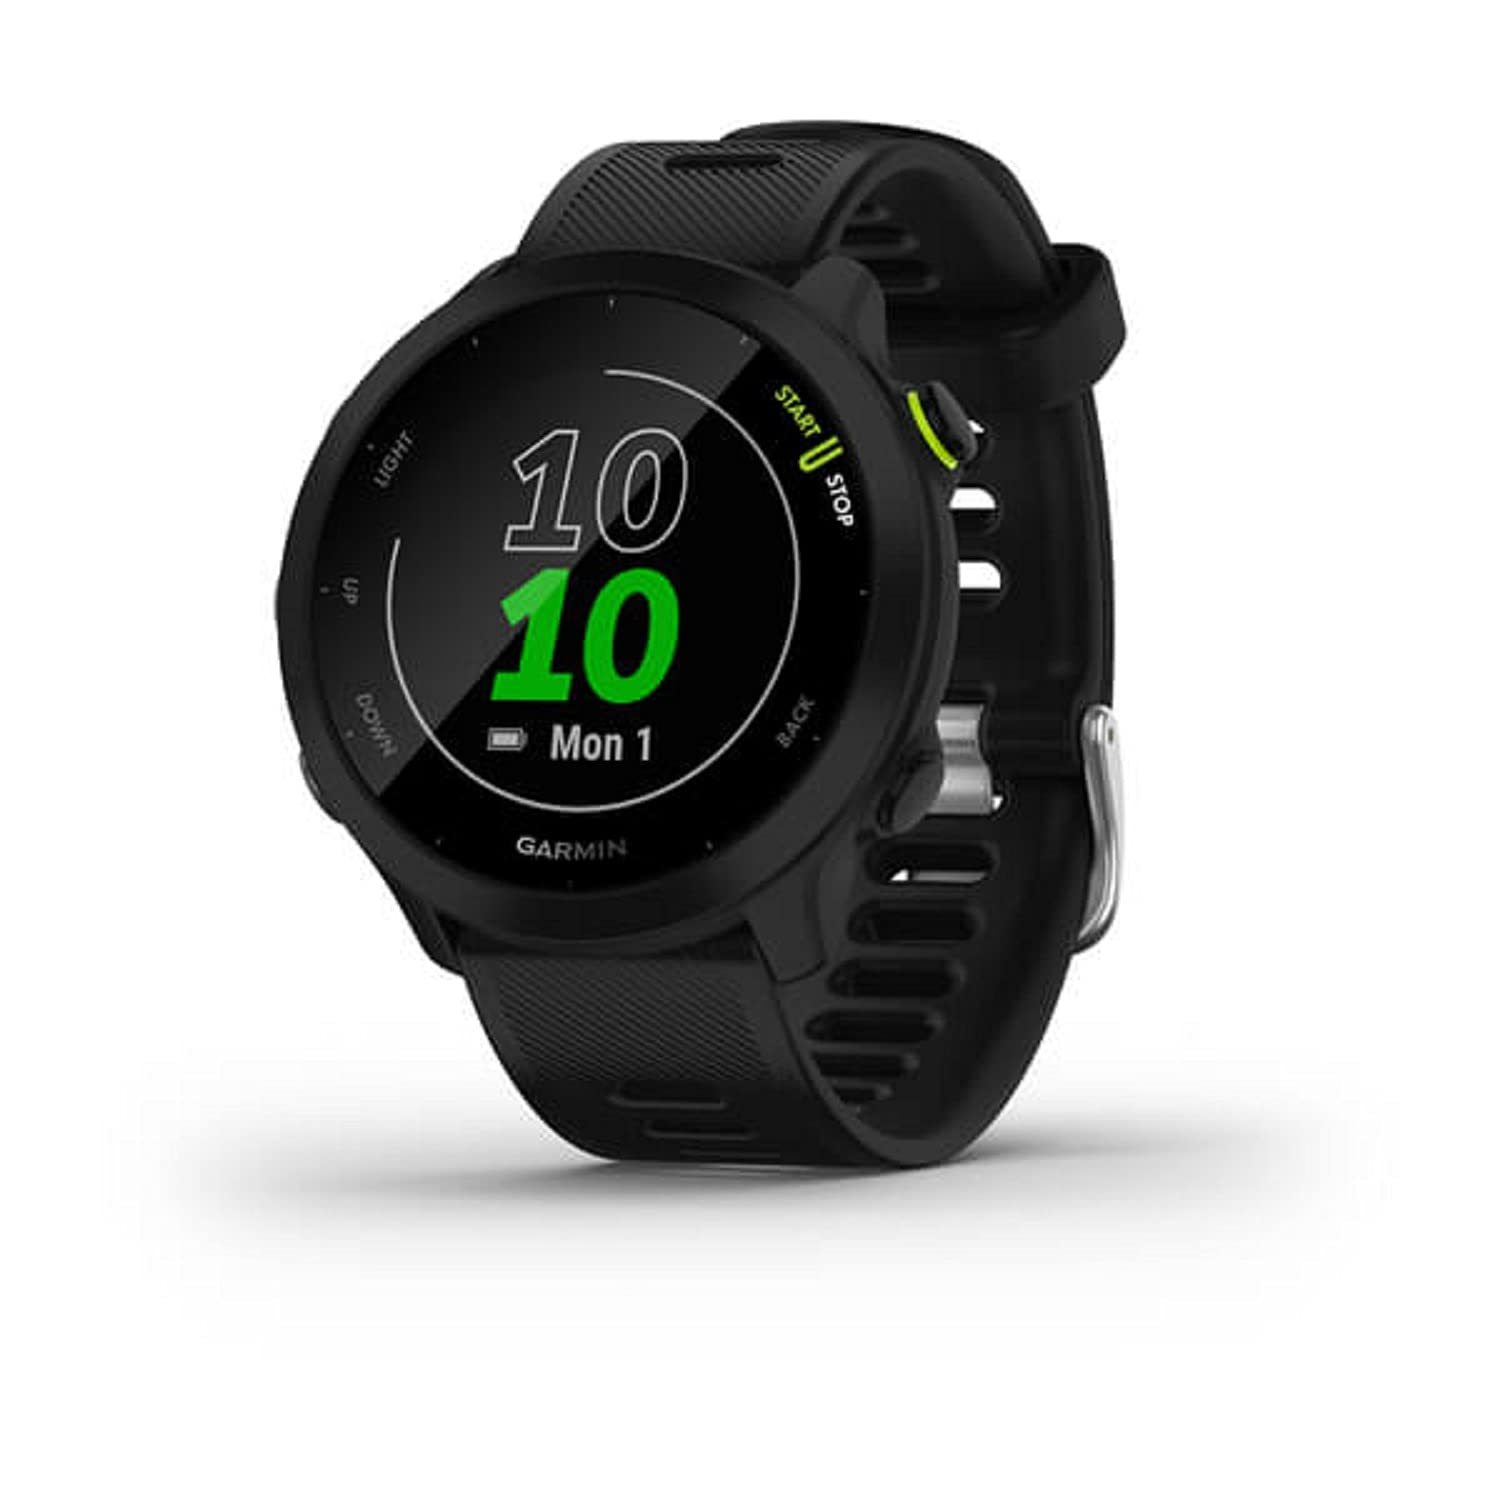 Primary image for Garmin 010-02562-00 Forerunner 55, GPS Running Watch with Daily Suggested Workou